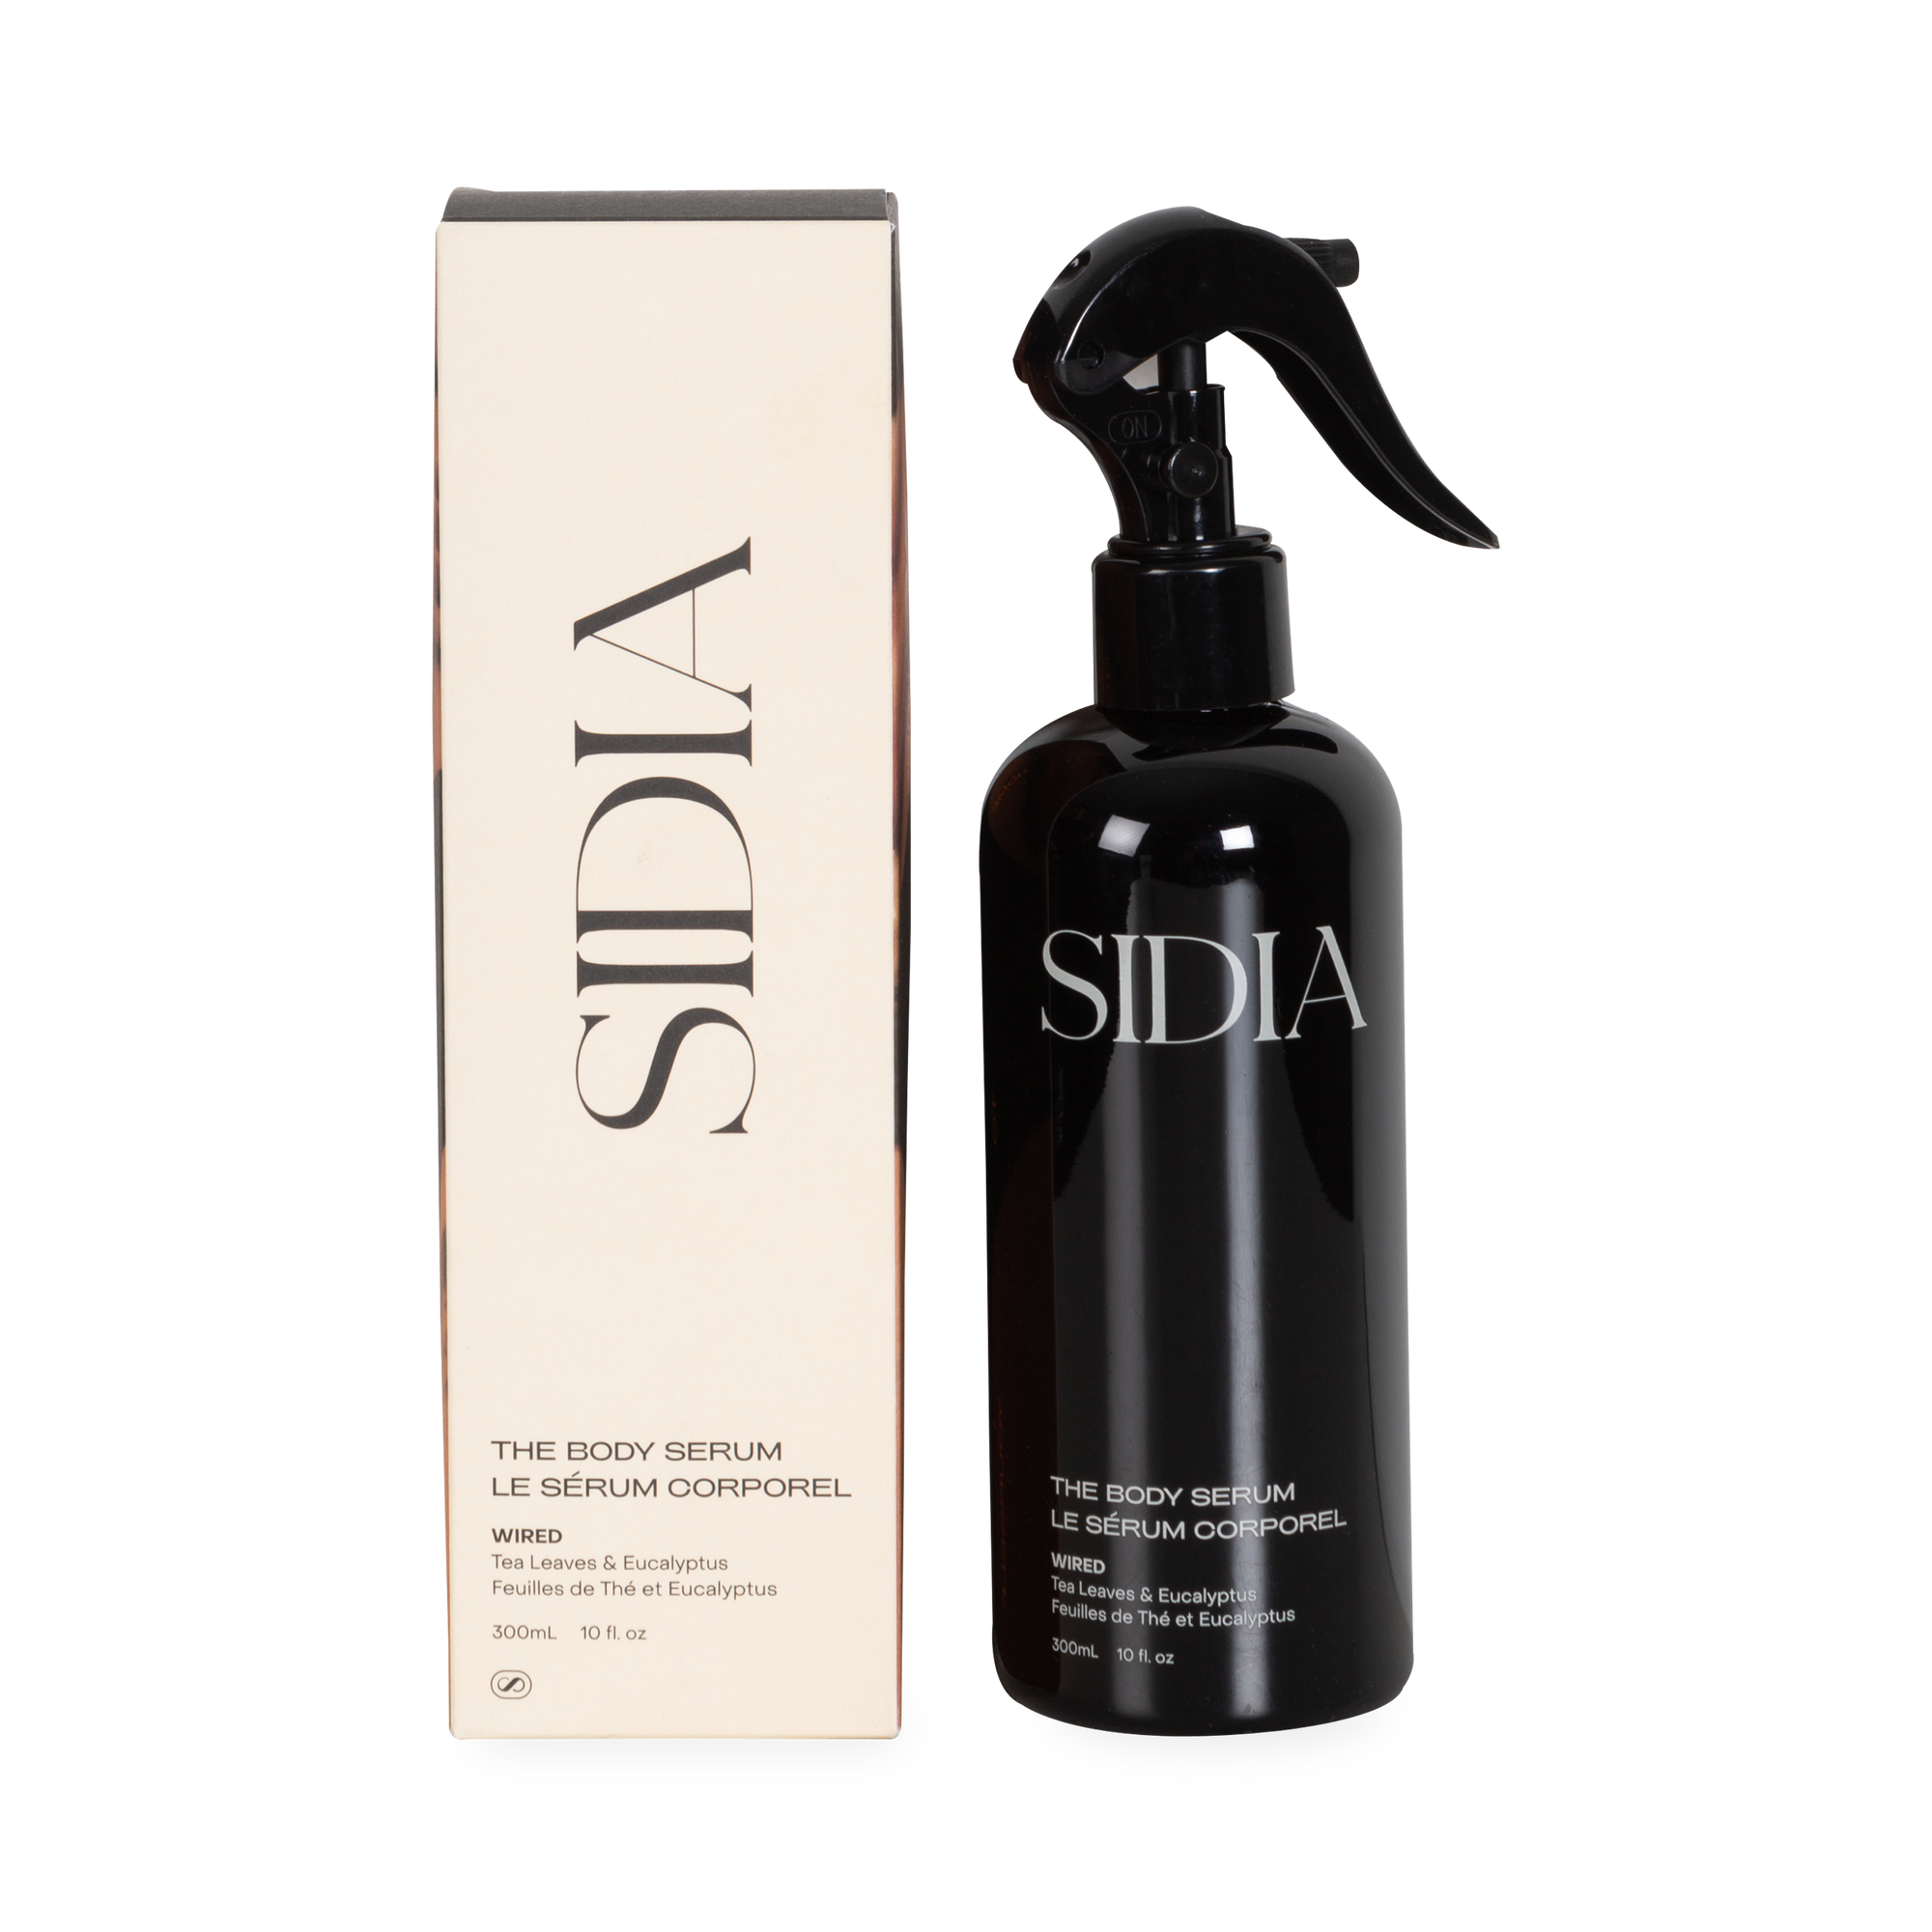 This lightweight, plant-based body serum delivers lasting hydration in a spray bottle for effortless application.